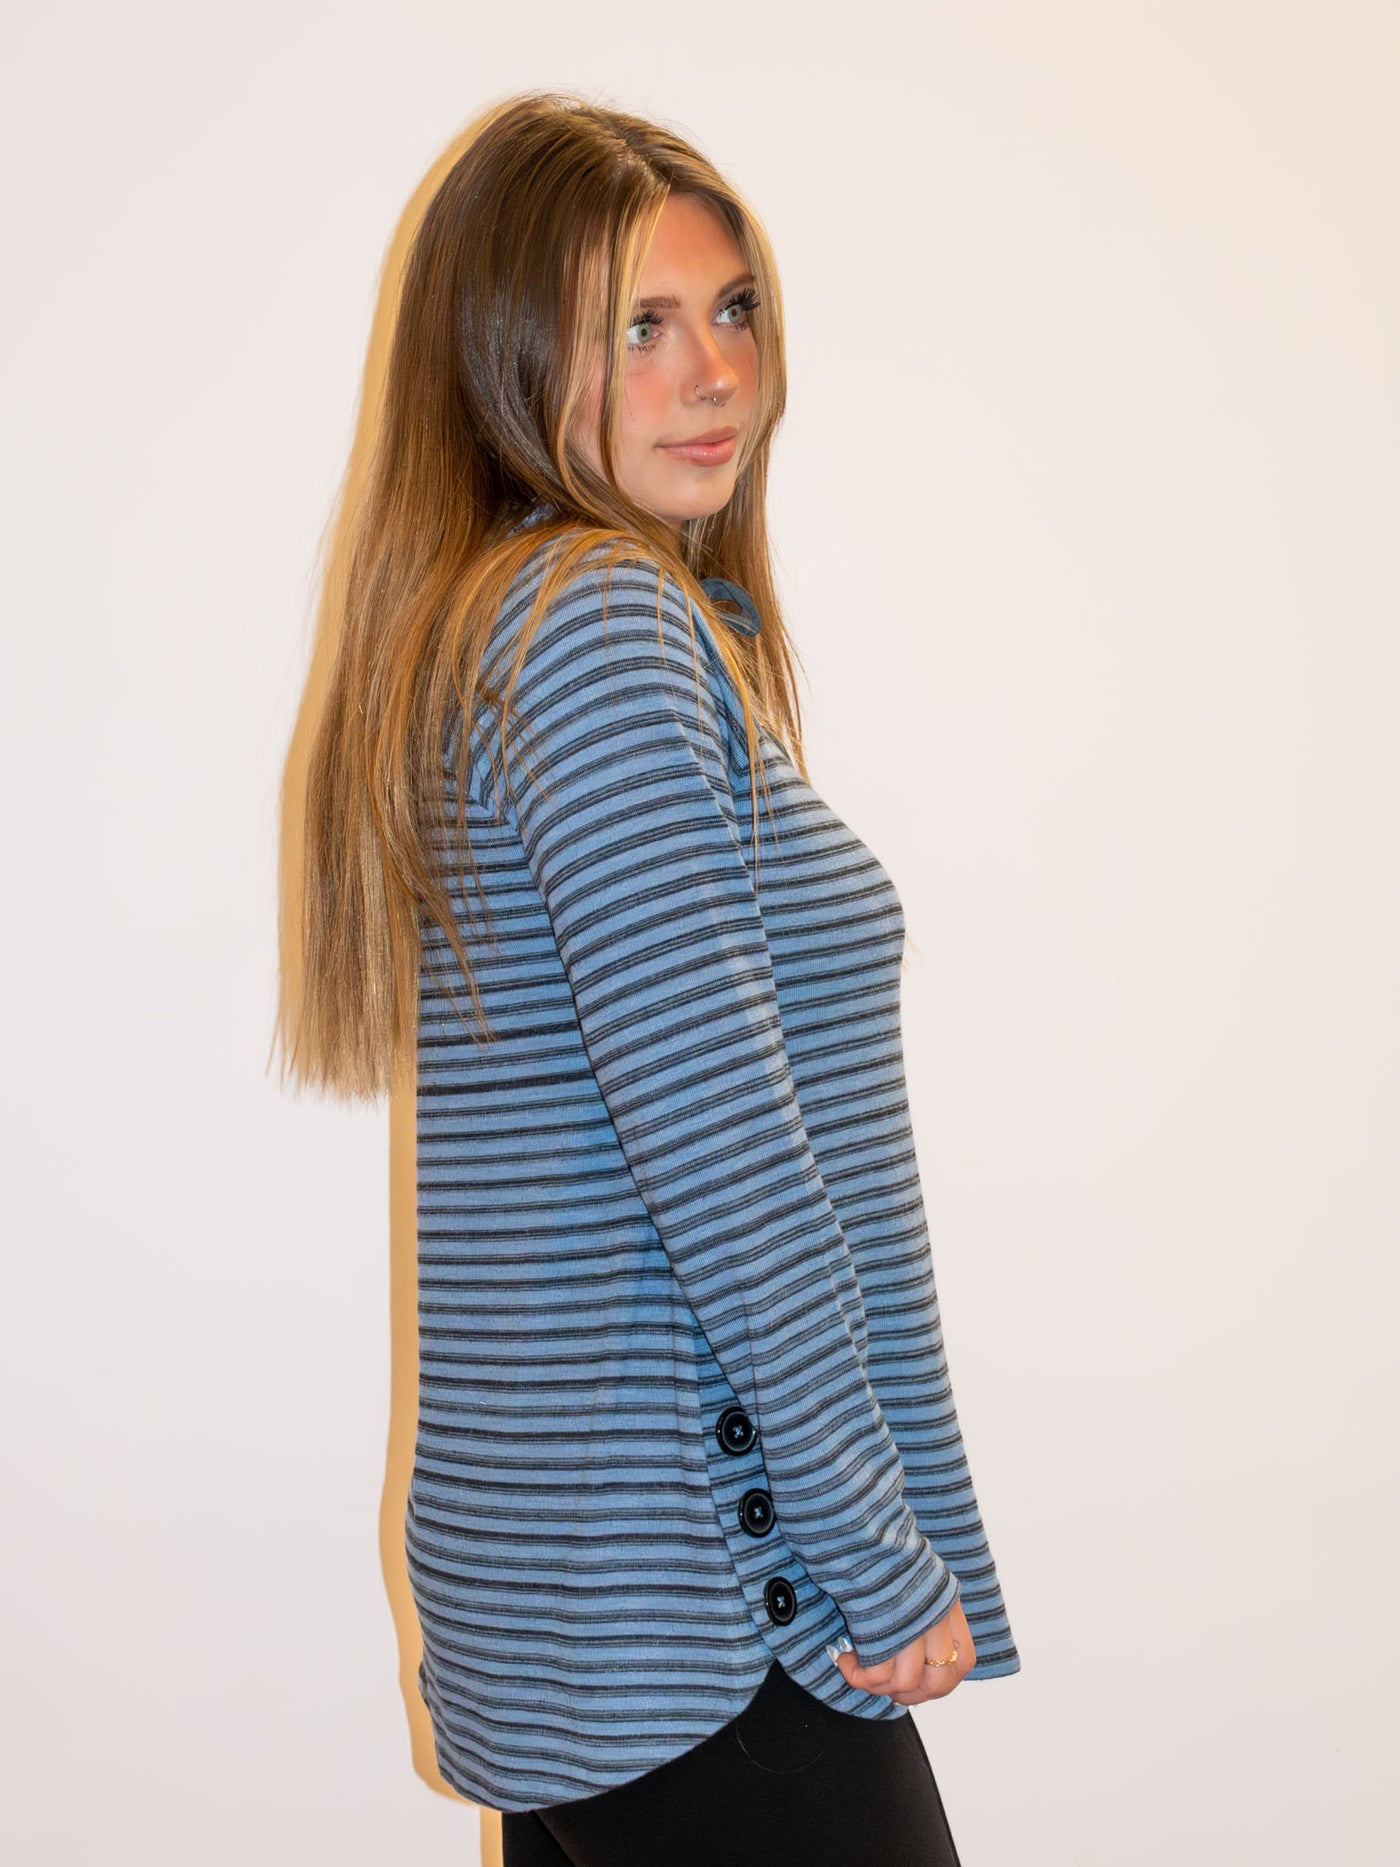 A model wearing a blue and gray striped top with button details on the side. The model has it paired with black leggings.